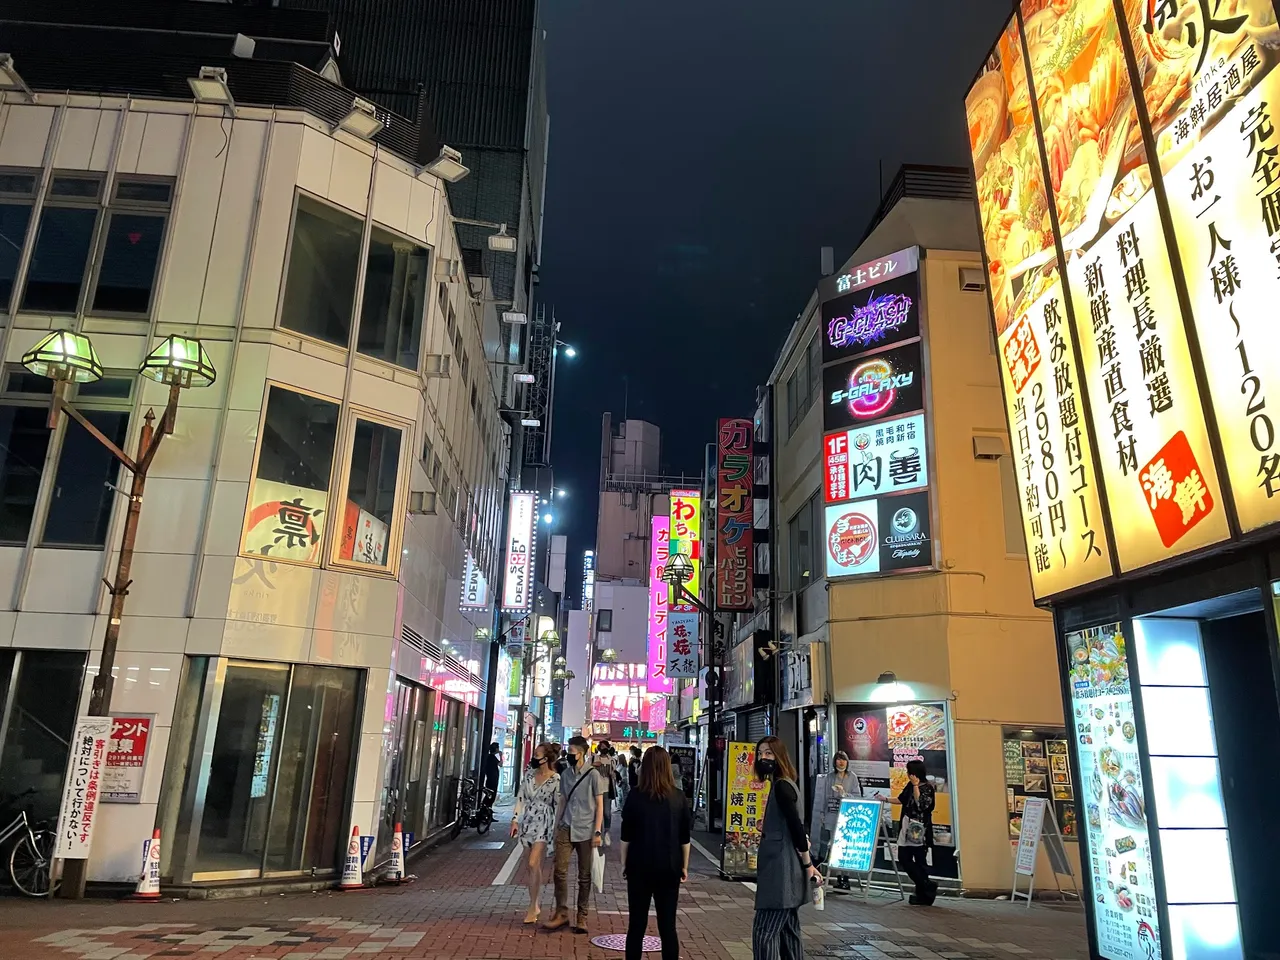 The other side of Kabukicho, the food area